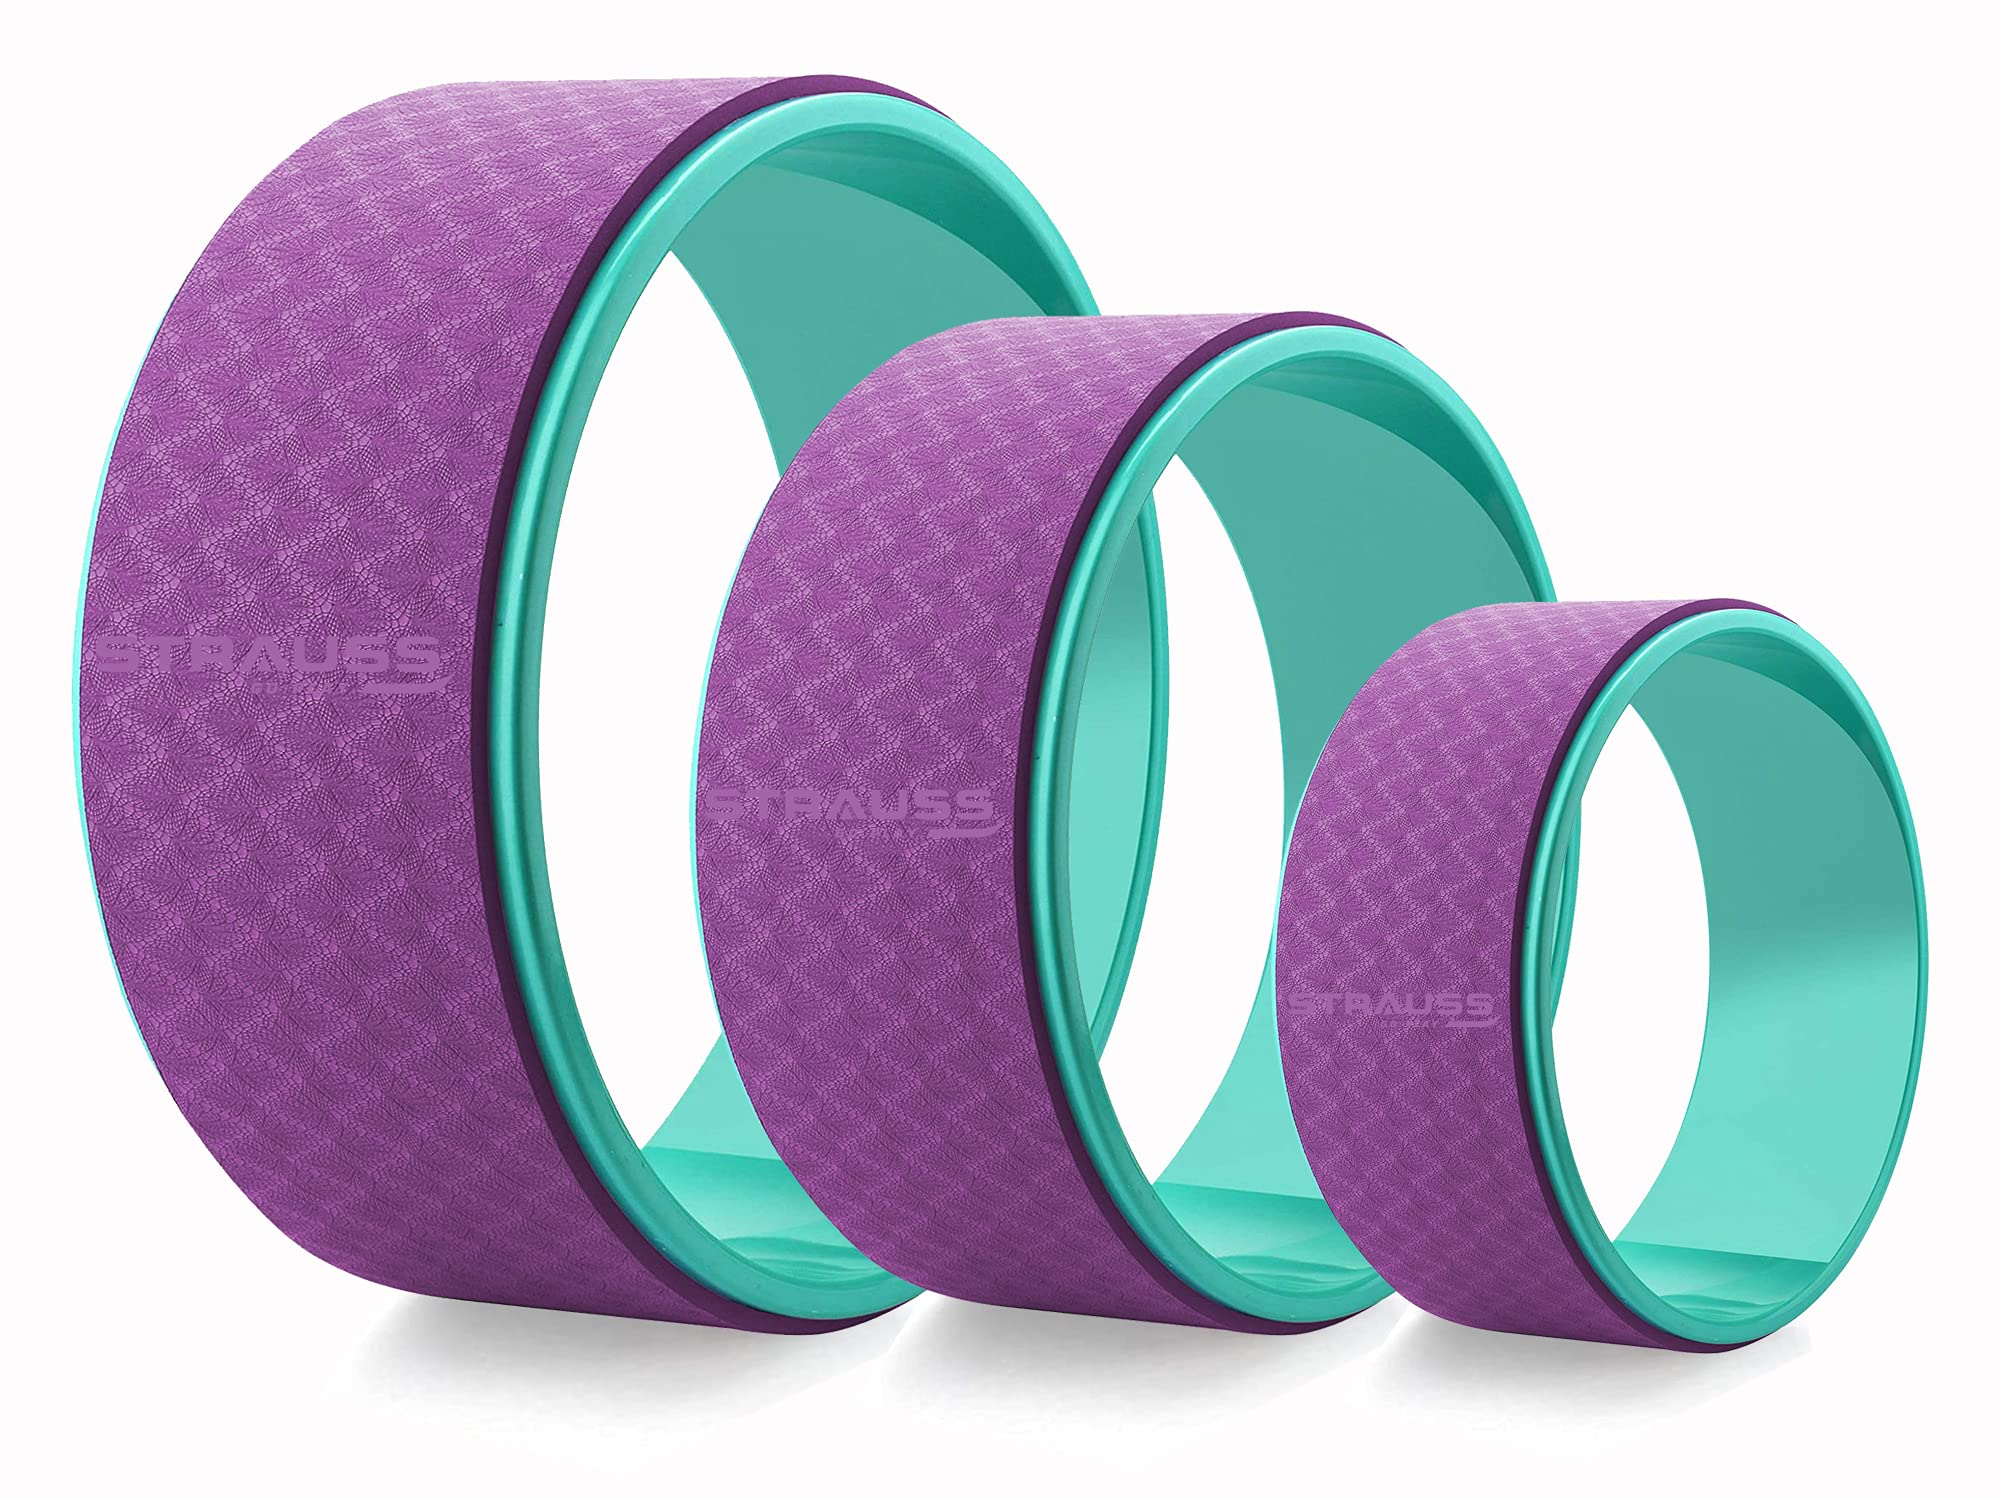 Reehut Yoga Wheel Set- 12.6” x 5” Strong Premium Back Roller, Yoga  Accessory Back Wheel with Thick Cushion for Stretching, Improving Yoga Pose  and Backbends (Purple), Foam Wedges -  Canada